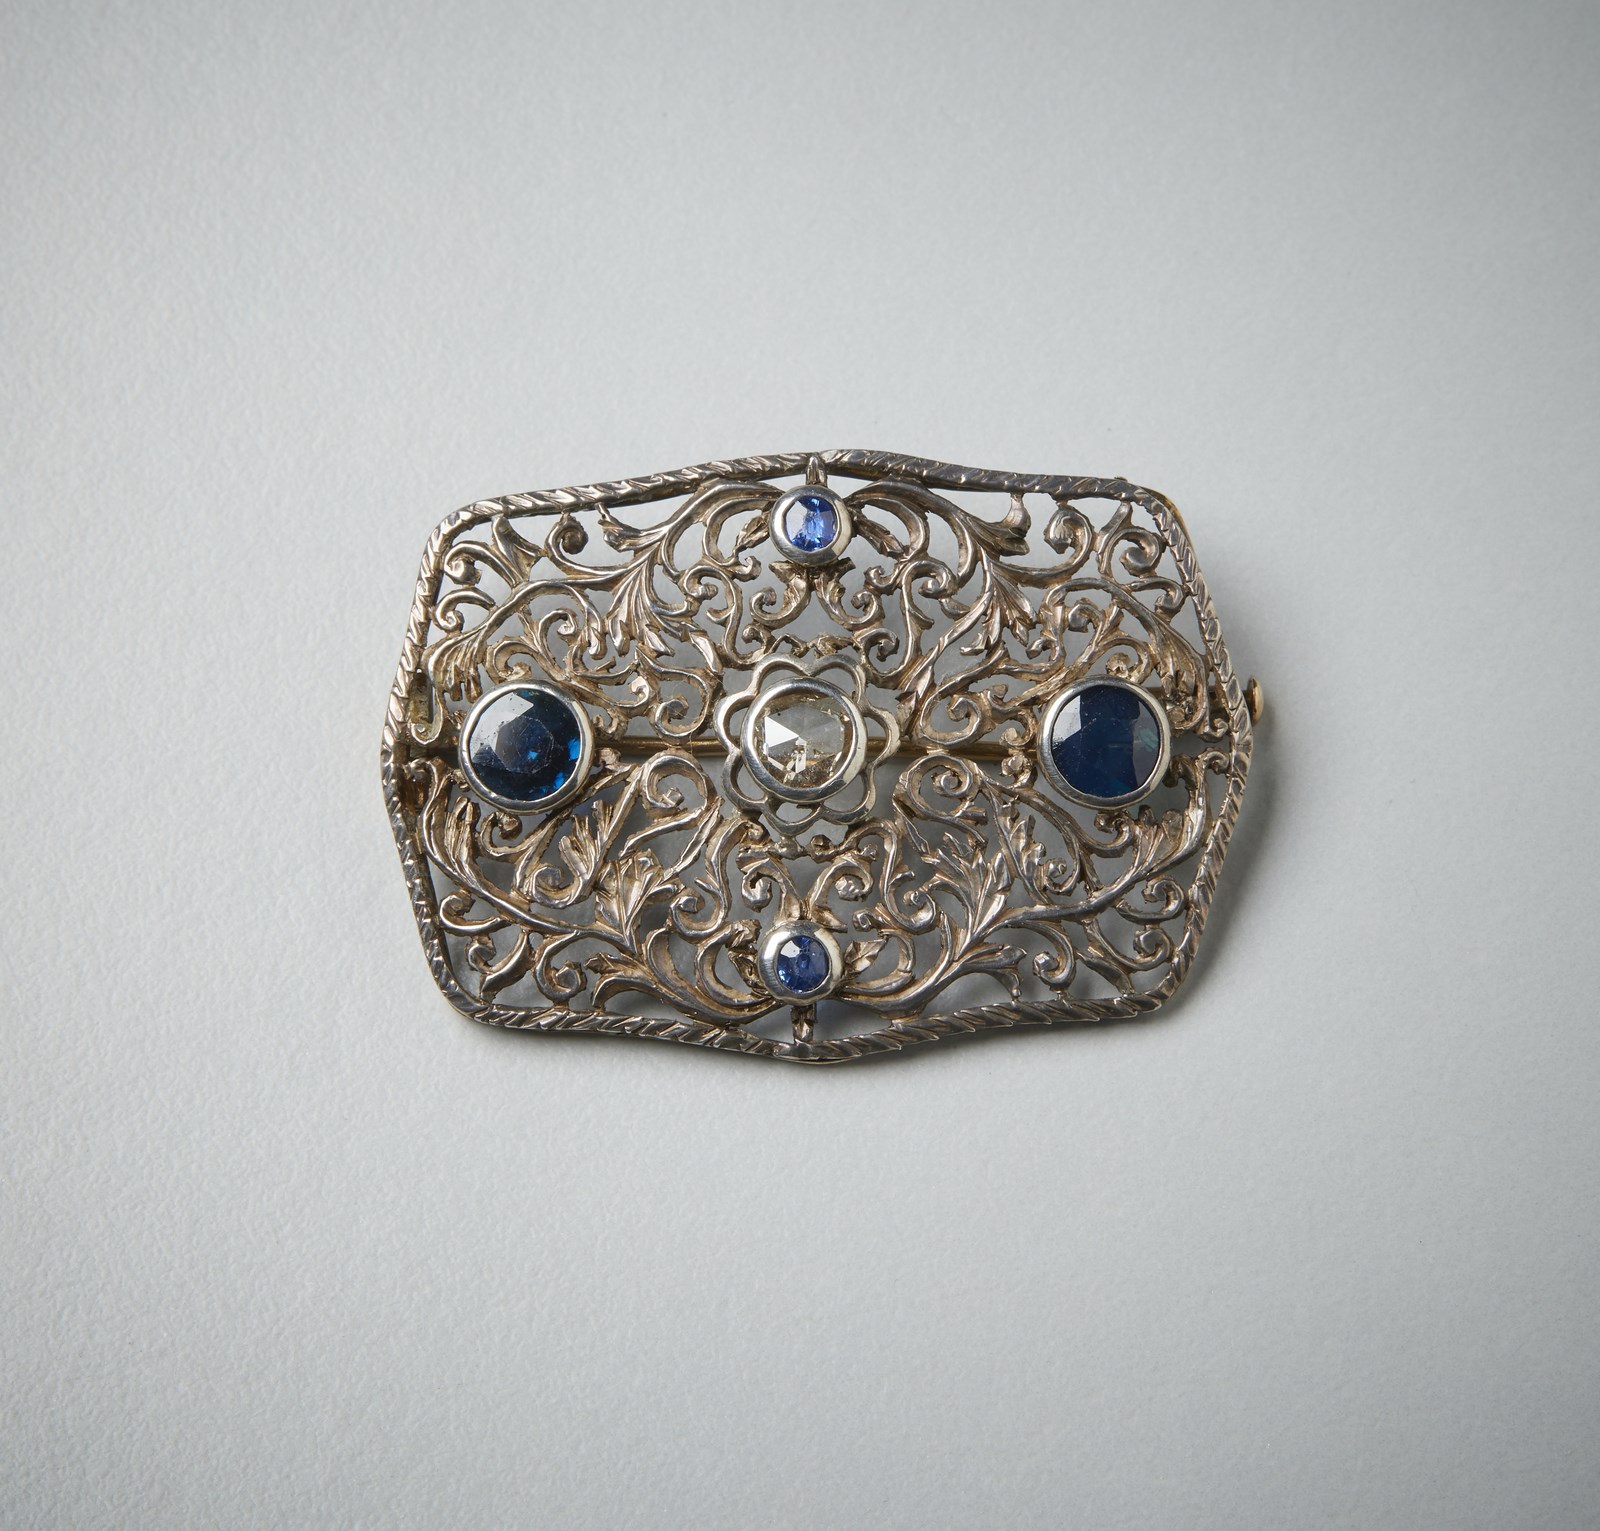 Rectangular openwork brooch with blue sapphires of approx 1.80 ct; central diamond rosette cut 0.35 ct approx. (. )